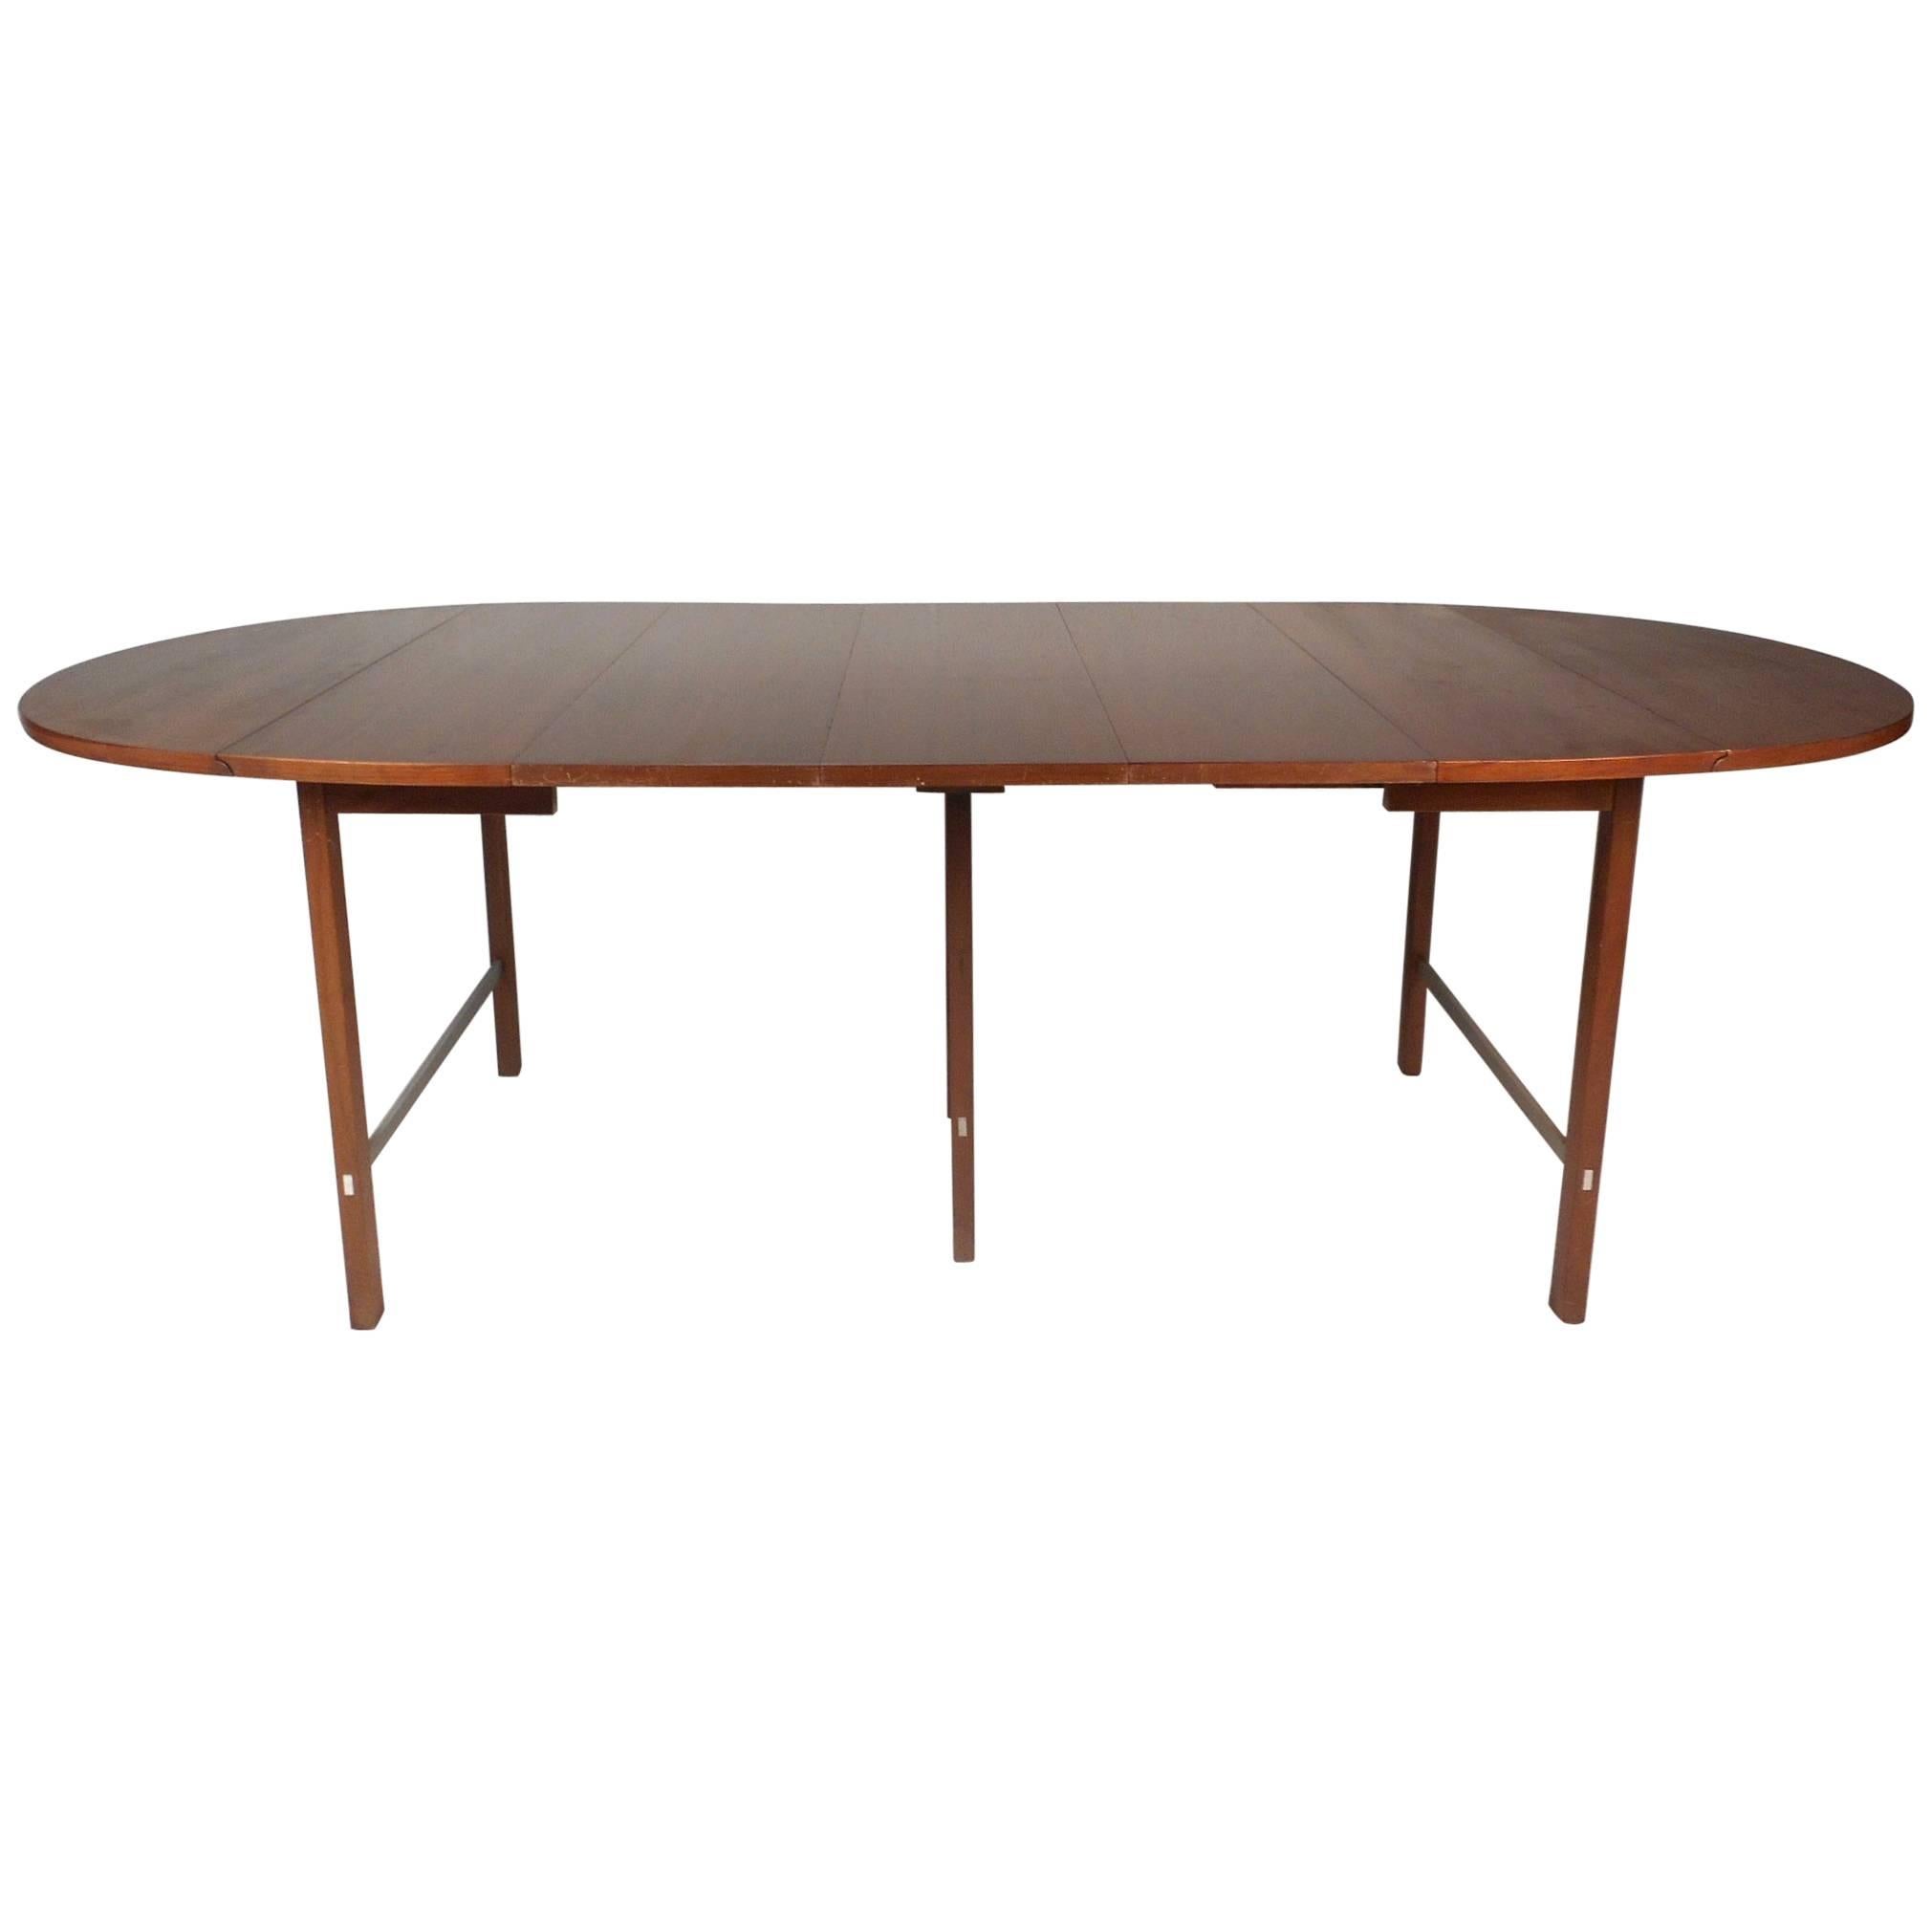 Mid-Century Modern Expandable Drop-Leaf Dining Table by Paul McCobb